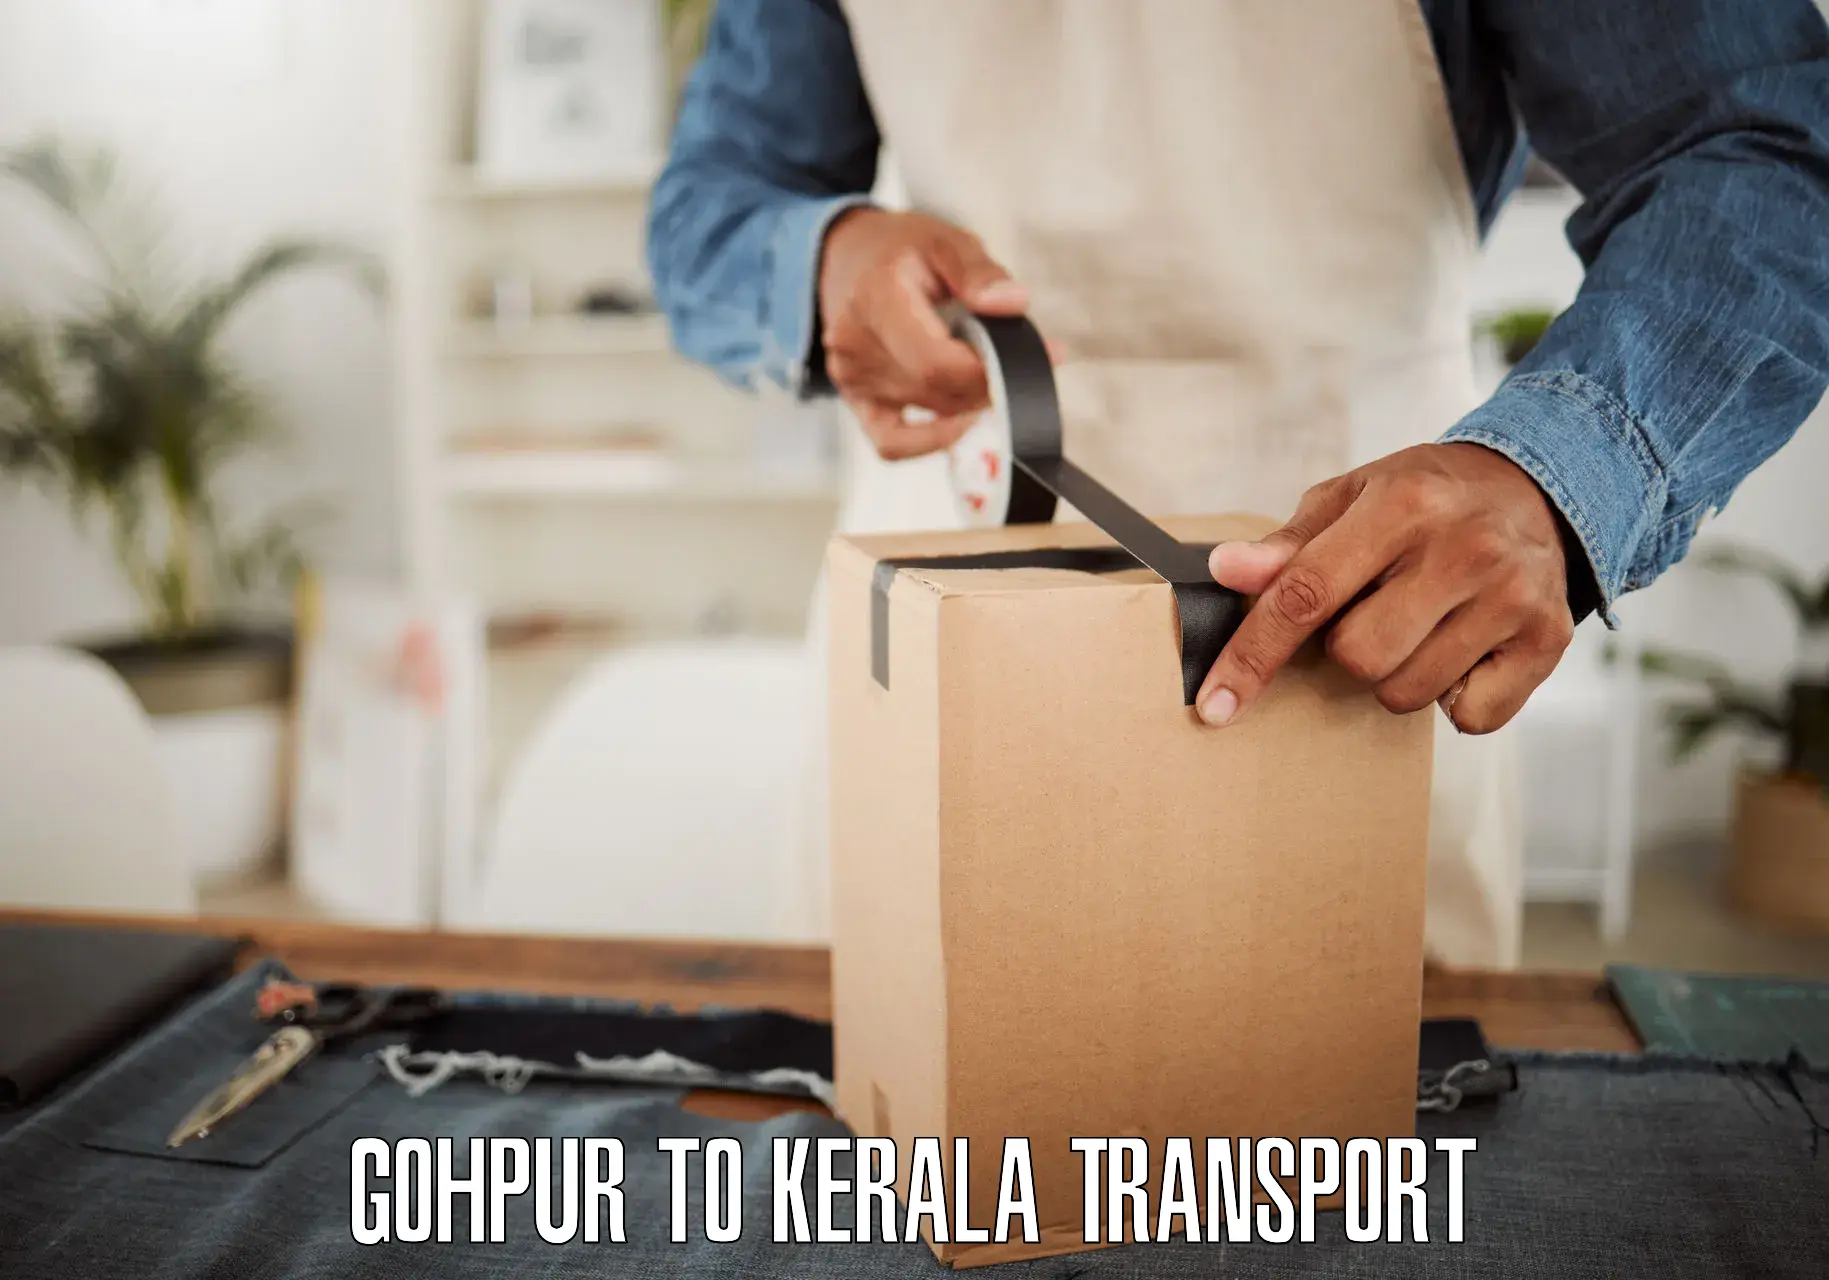 Commercial transport service Gohpur to Cochin University of Science and Technology